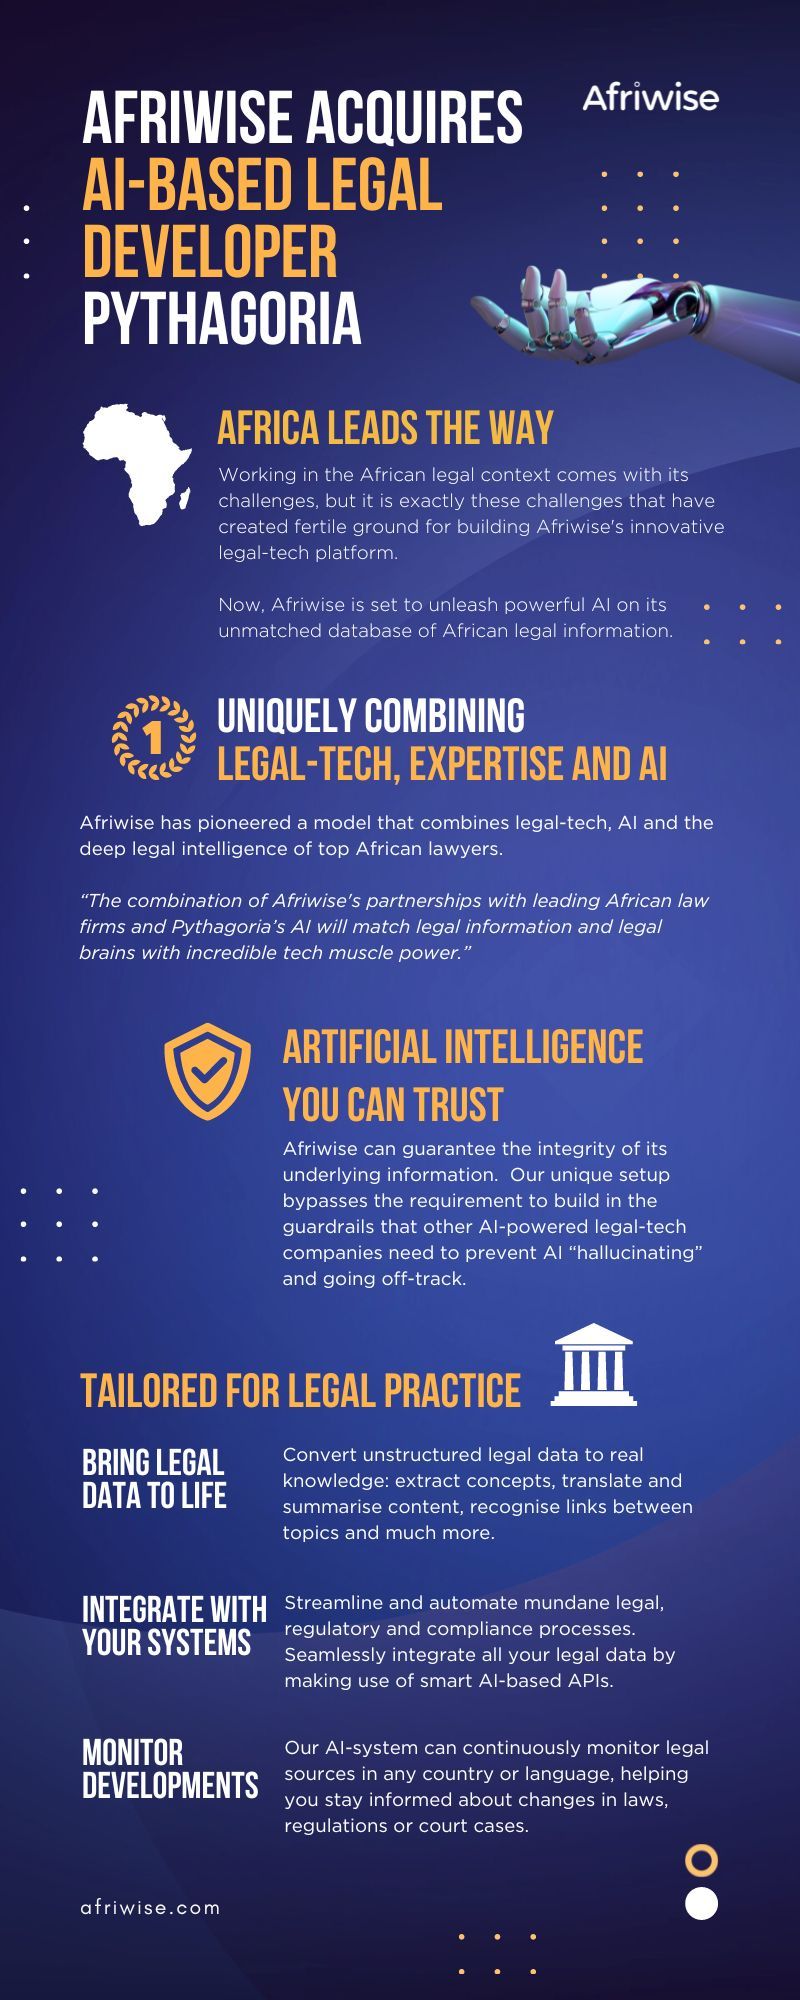 Afriwise Acquires Pythagoria, leading the way for Artificial Intelligence in legal practice.